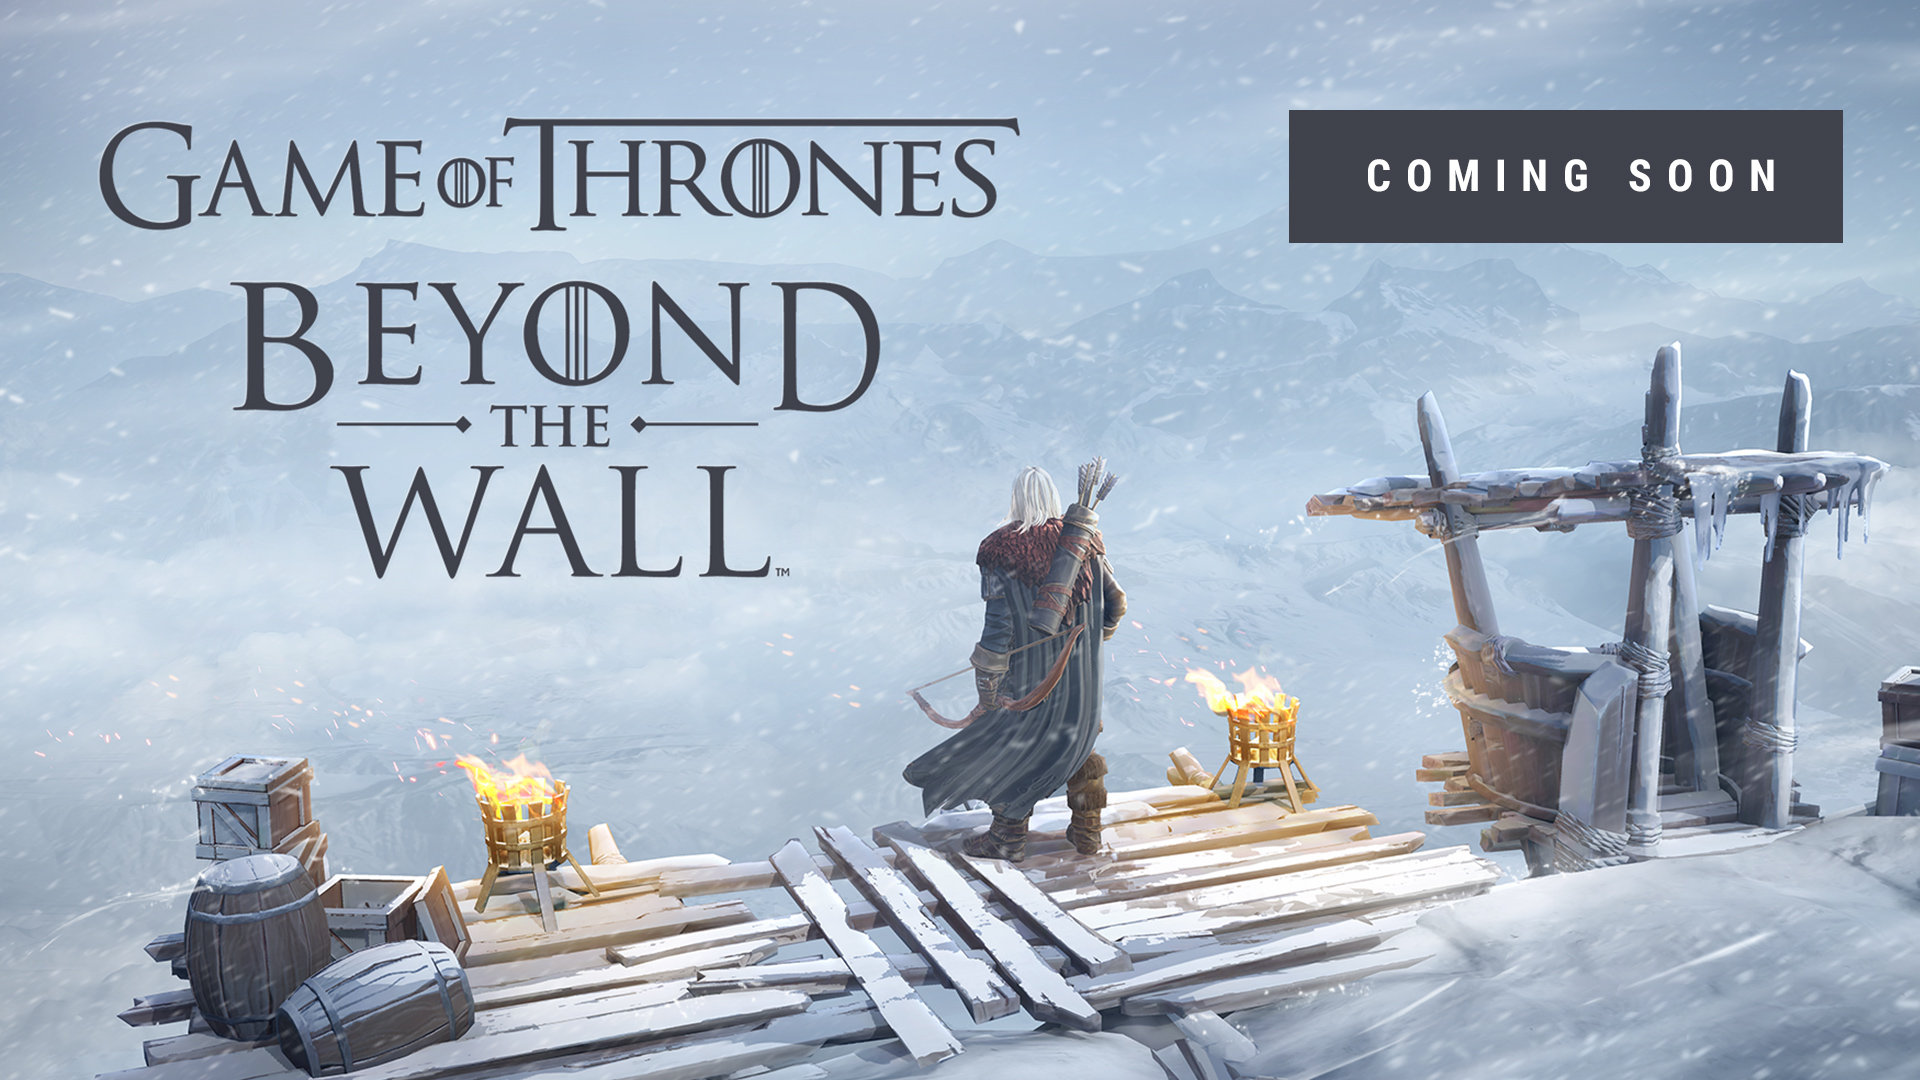 Game of Thrones Beyond the Wall - strategiczny RPG według „Game of Thrones” dla Androida i iOS